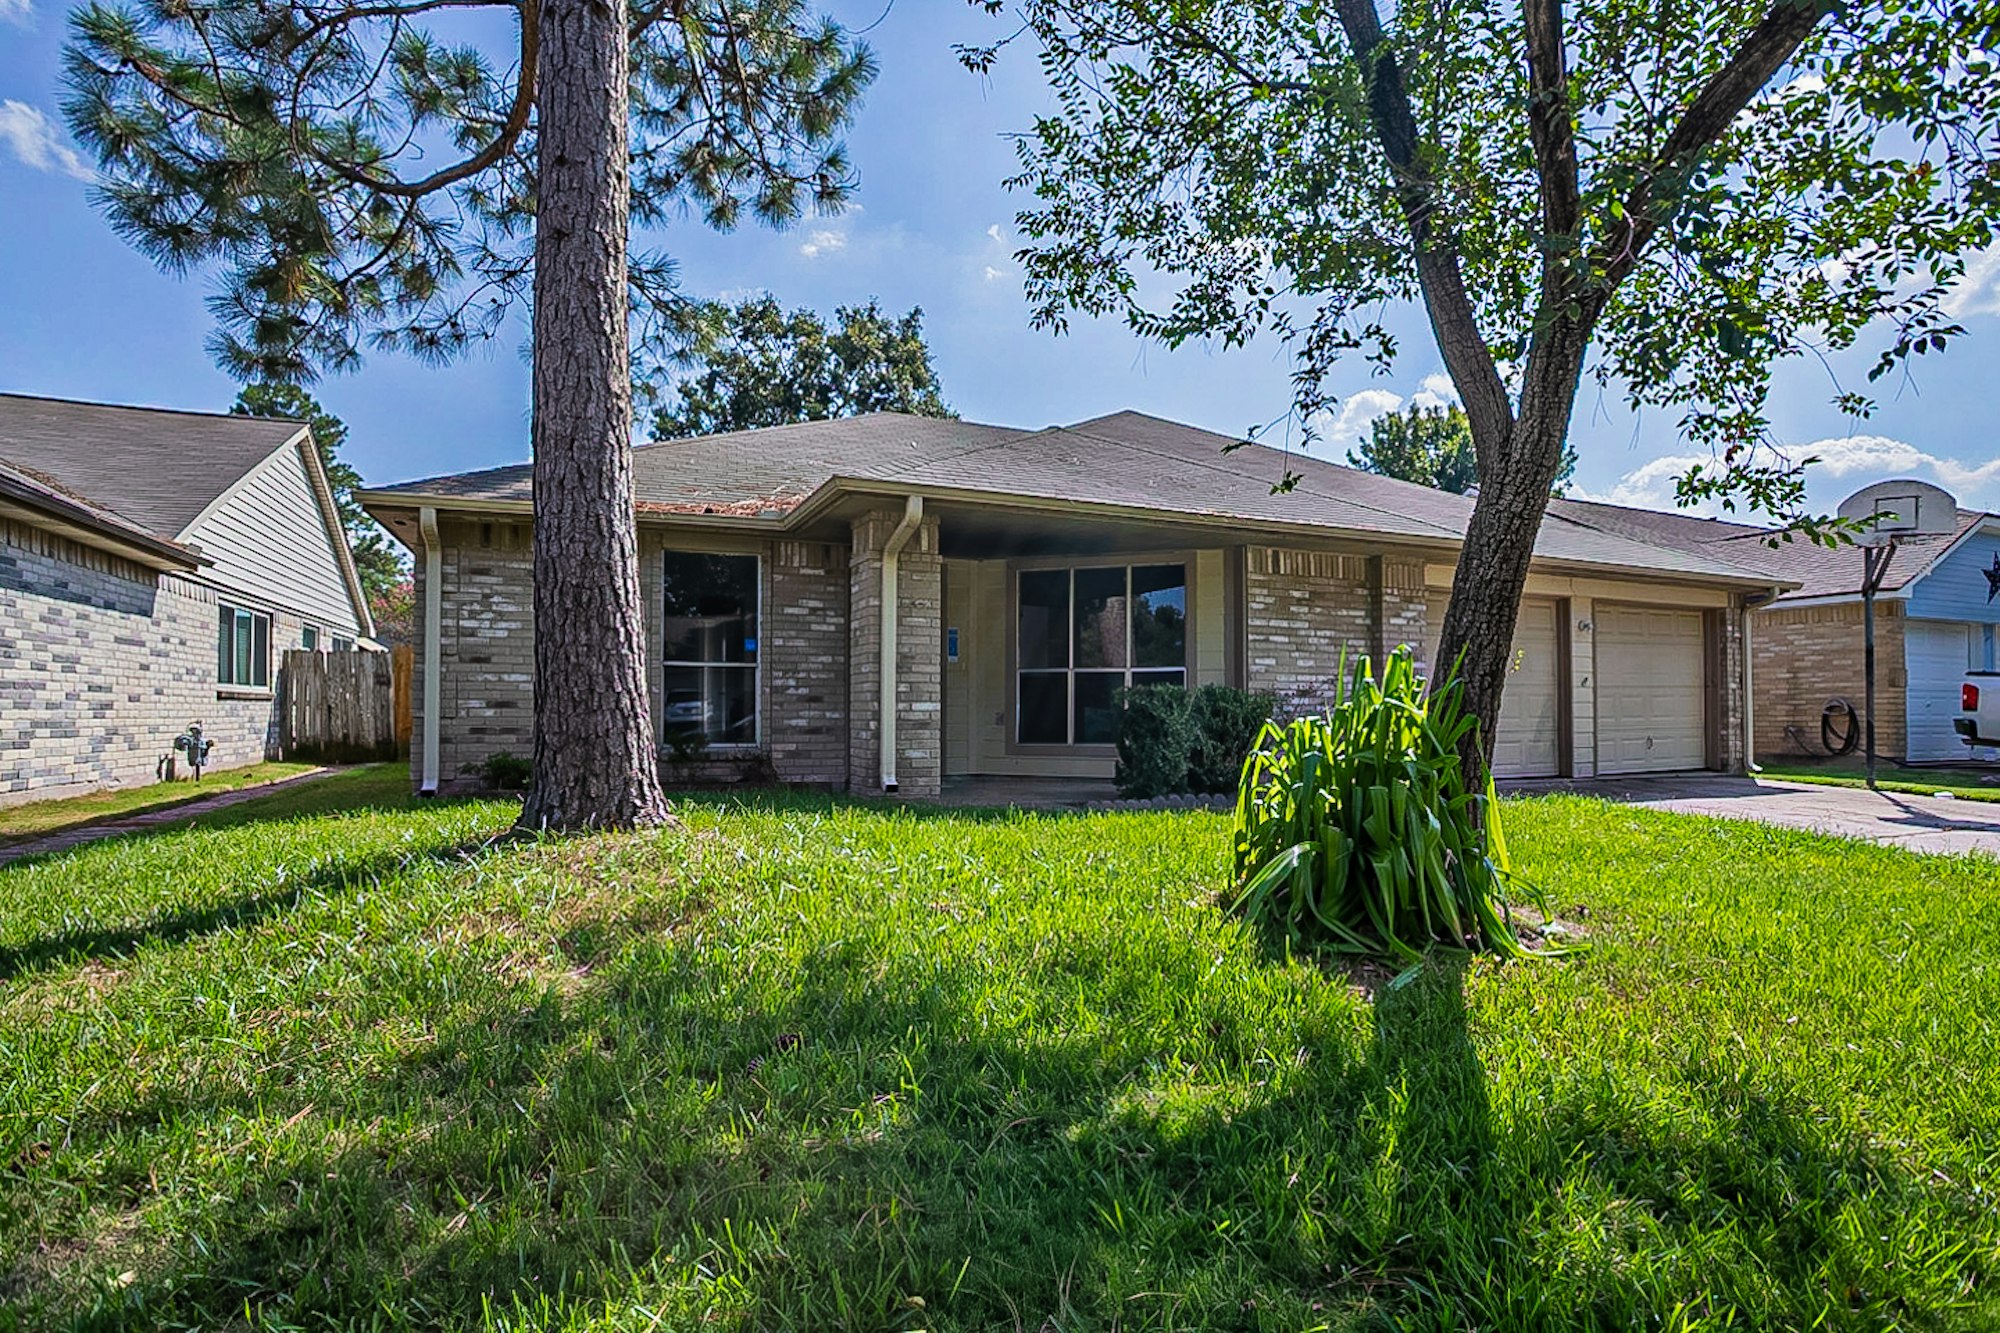 Photo 1 of 17 - 19207 Winding Branch Dr, Katy, TX 77449